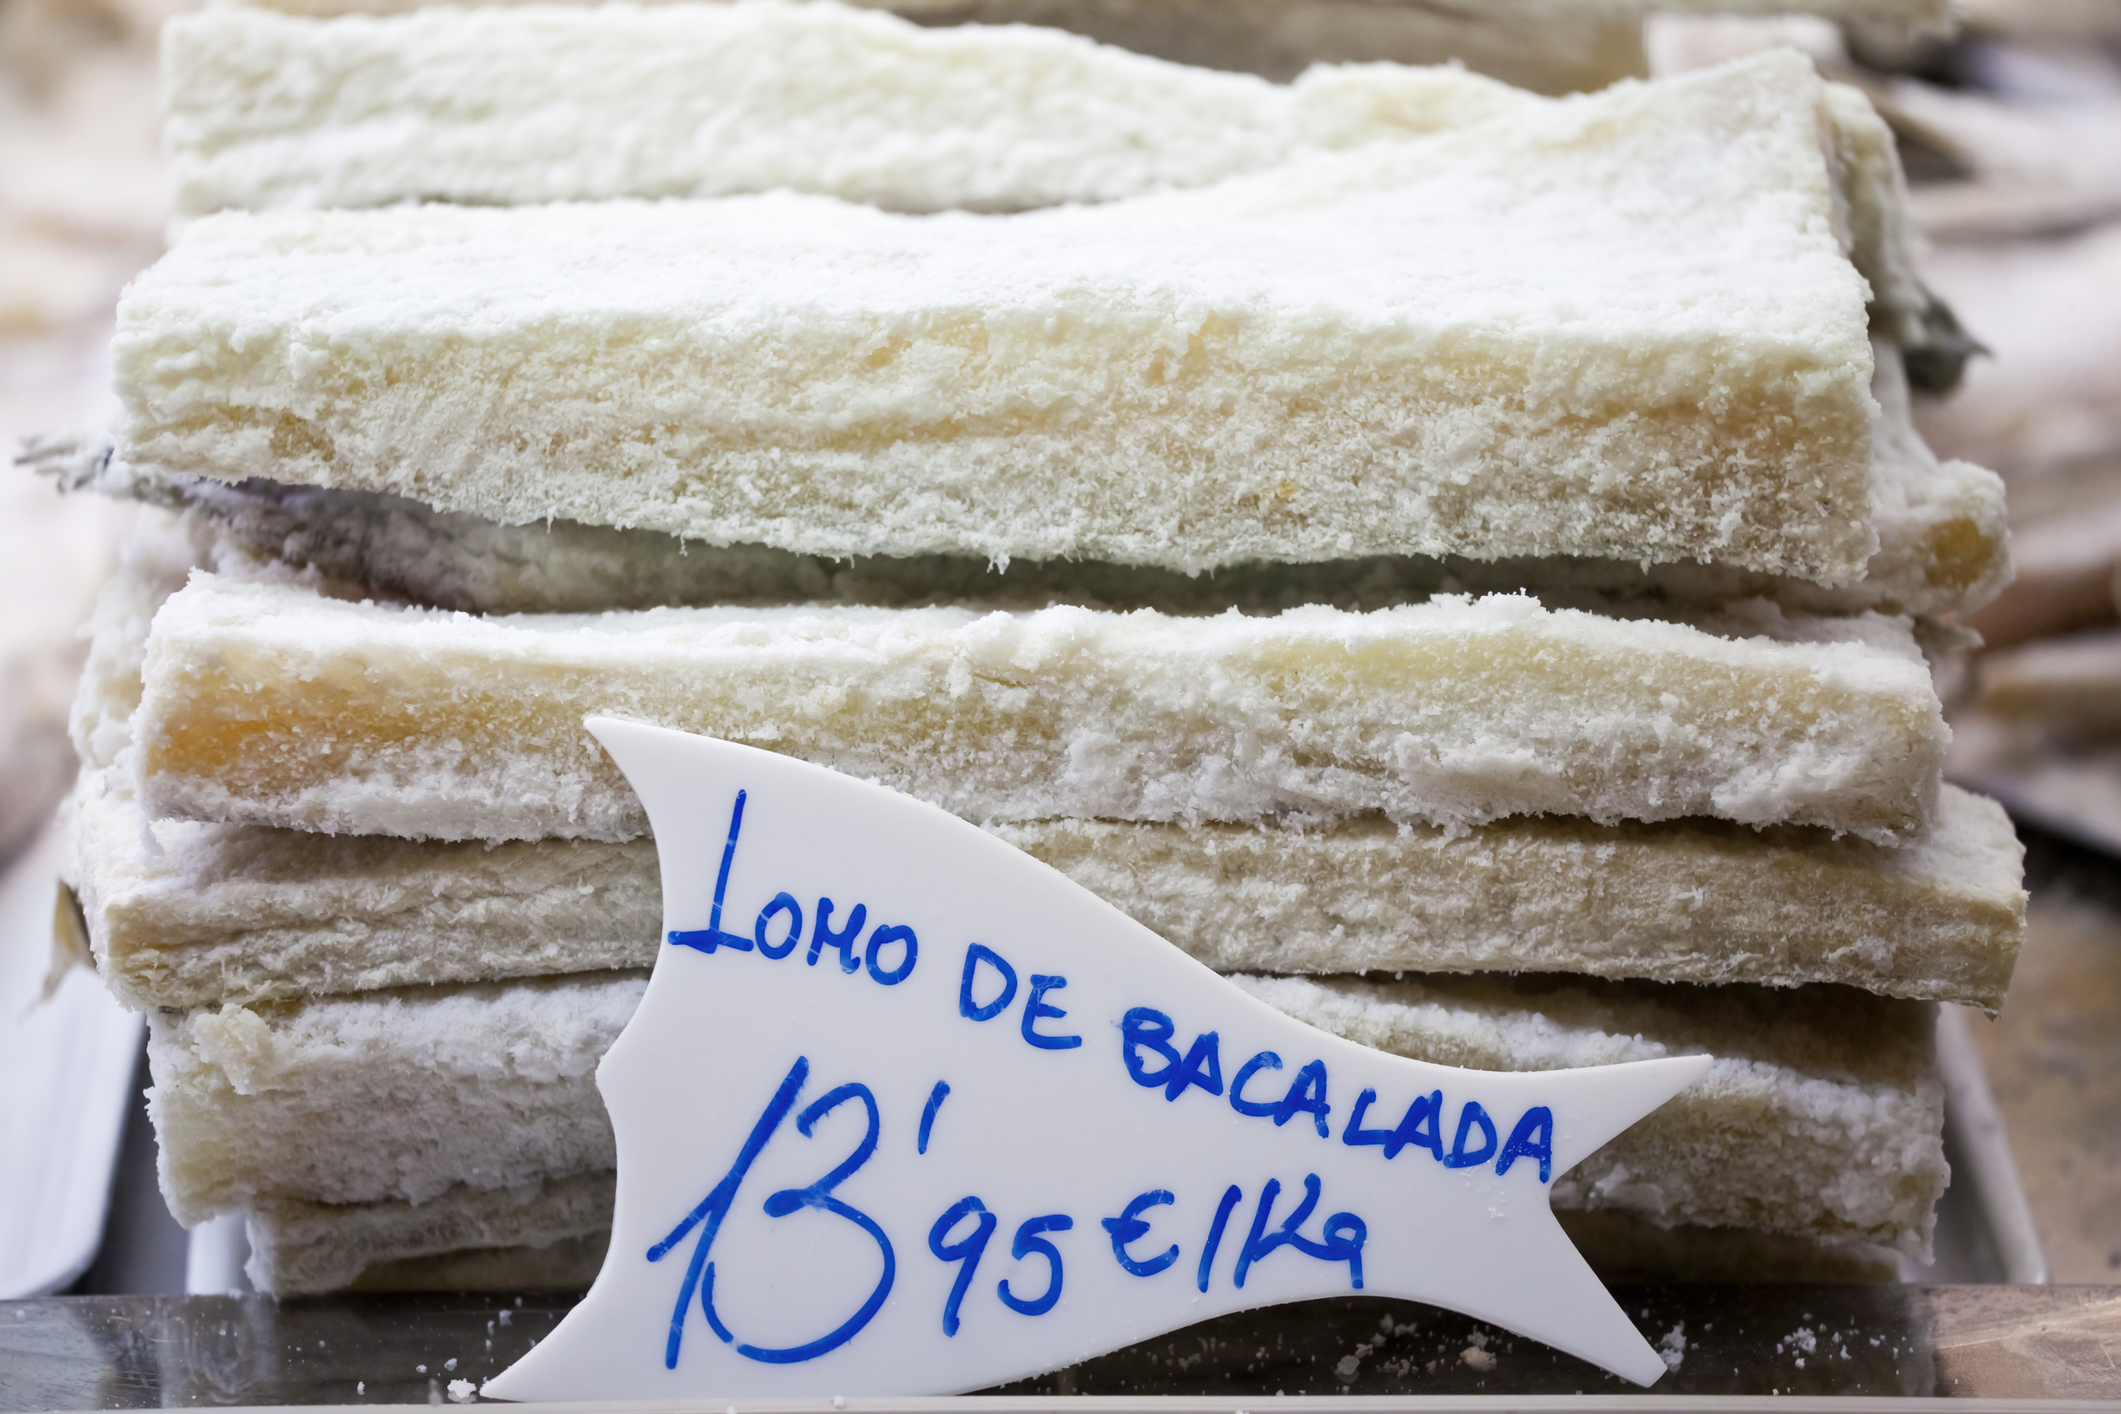 Salted Fillet of Cod for sale at a Spanish Basque food market. Salt Cod has been produced for at least 500 years, as it was a means of preserving fish prior to refrigeration.